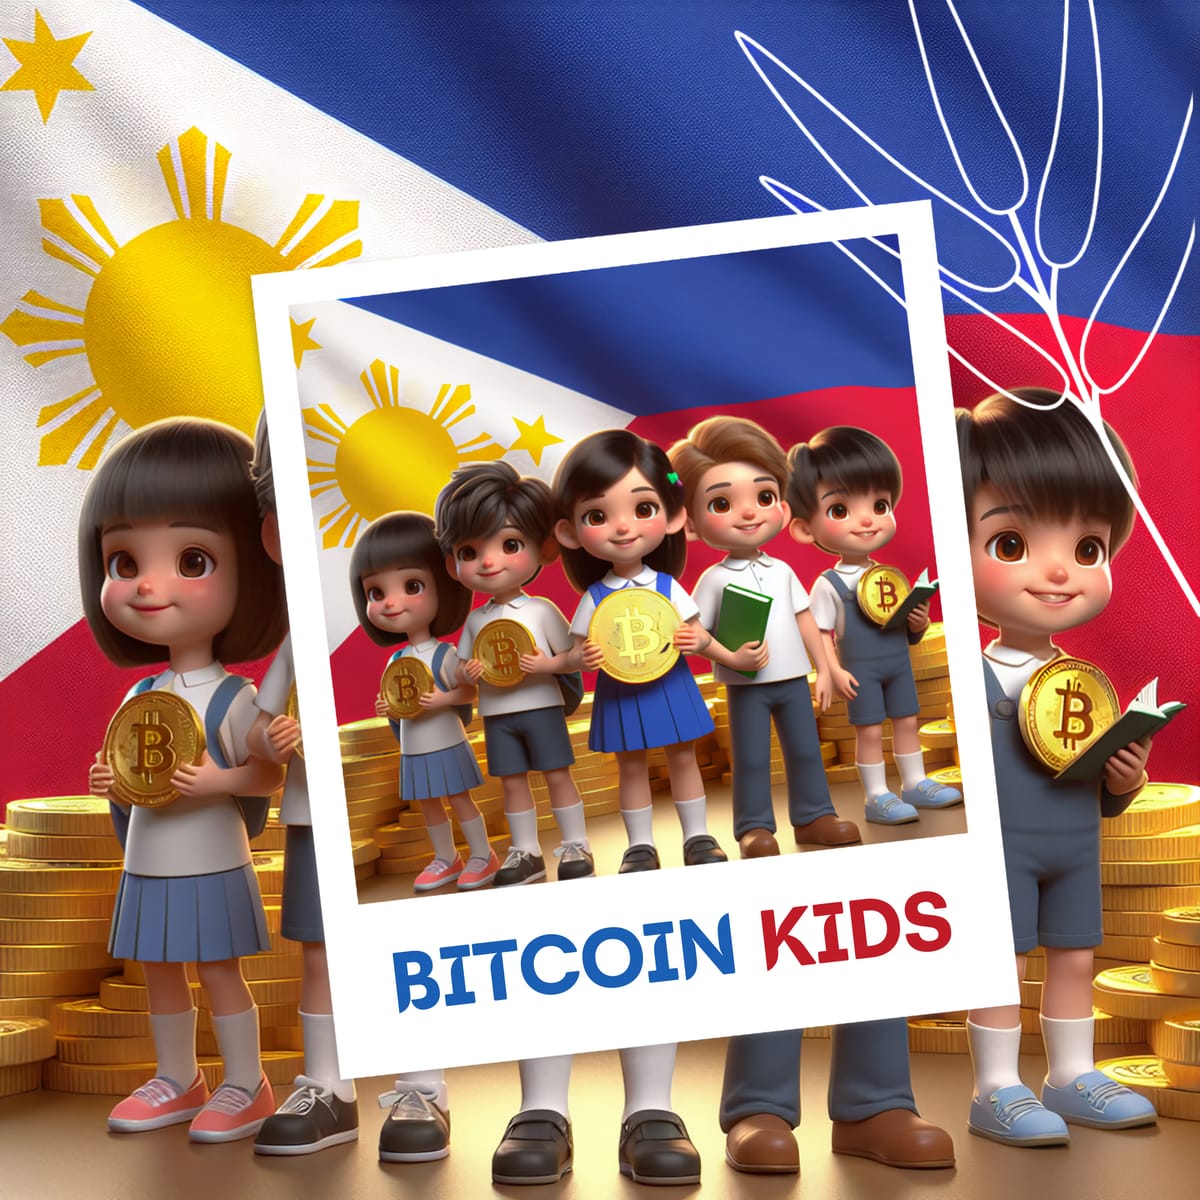 ‘Bitcoin Kids’ Launched!